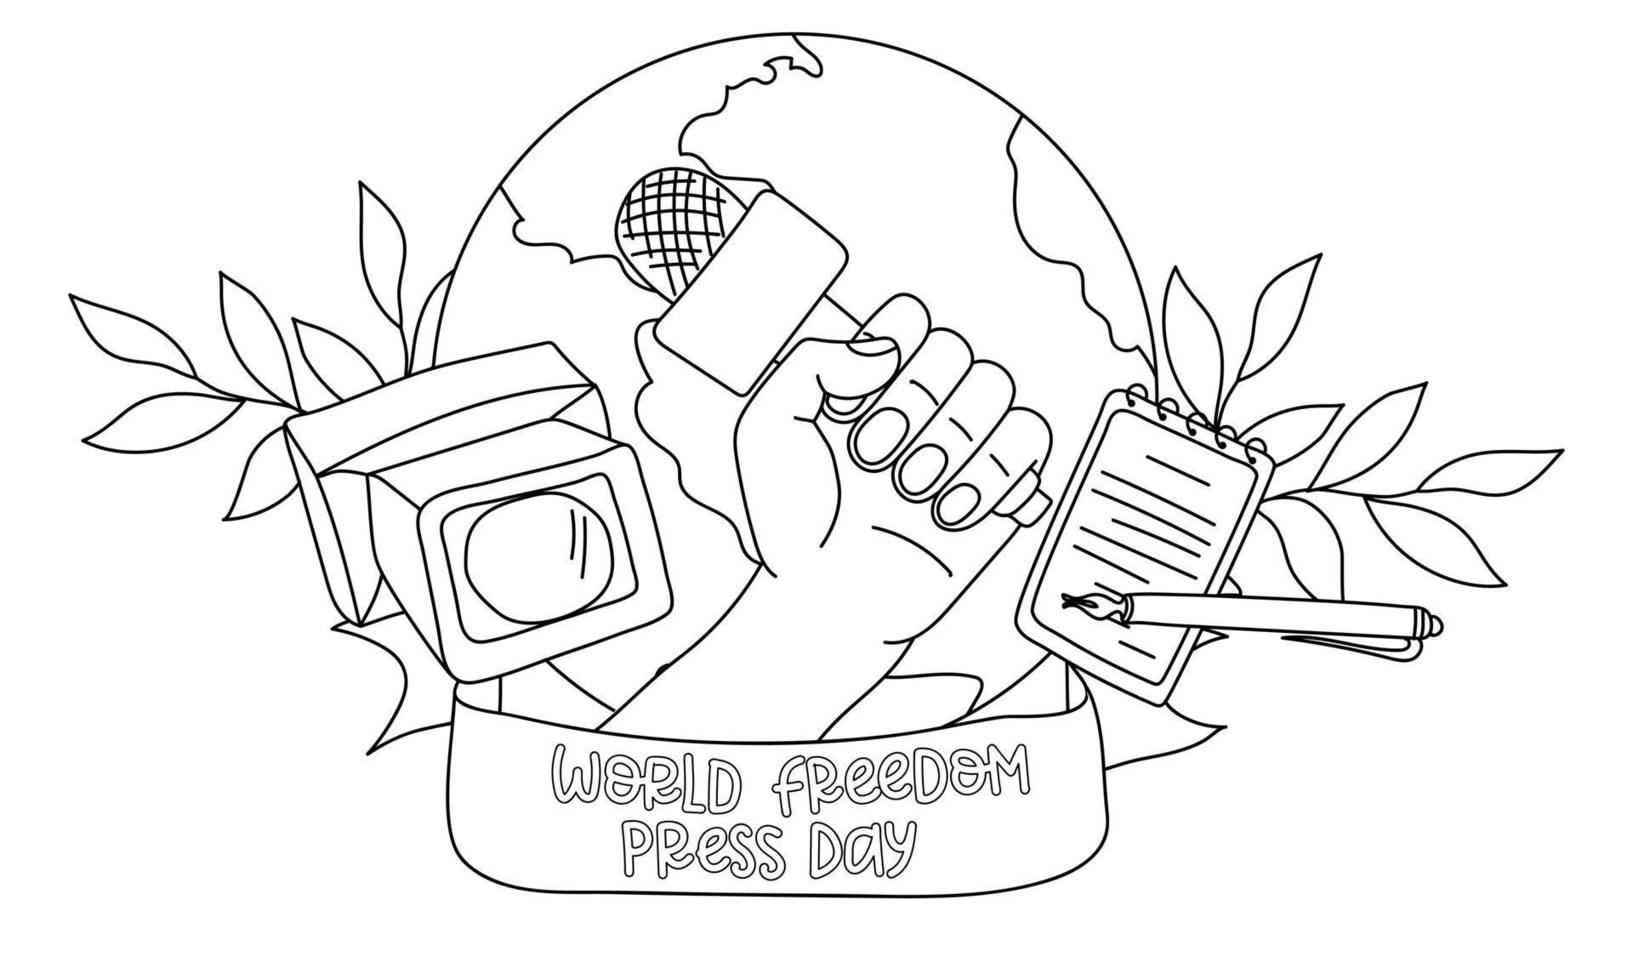 Banner for the World Press Freedom Day - May 3. Contour drawing of a hand with a microphone, a video camera, a notebook pen, a branch of sheets. Black and white illustration. A simple banner to print vector